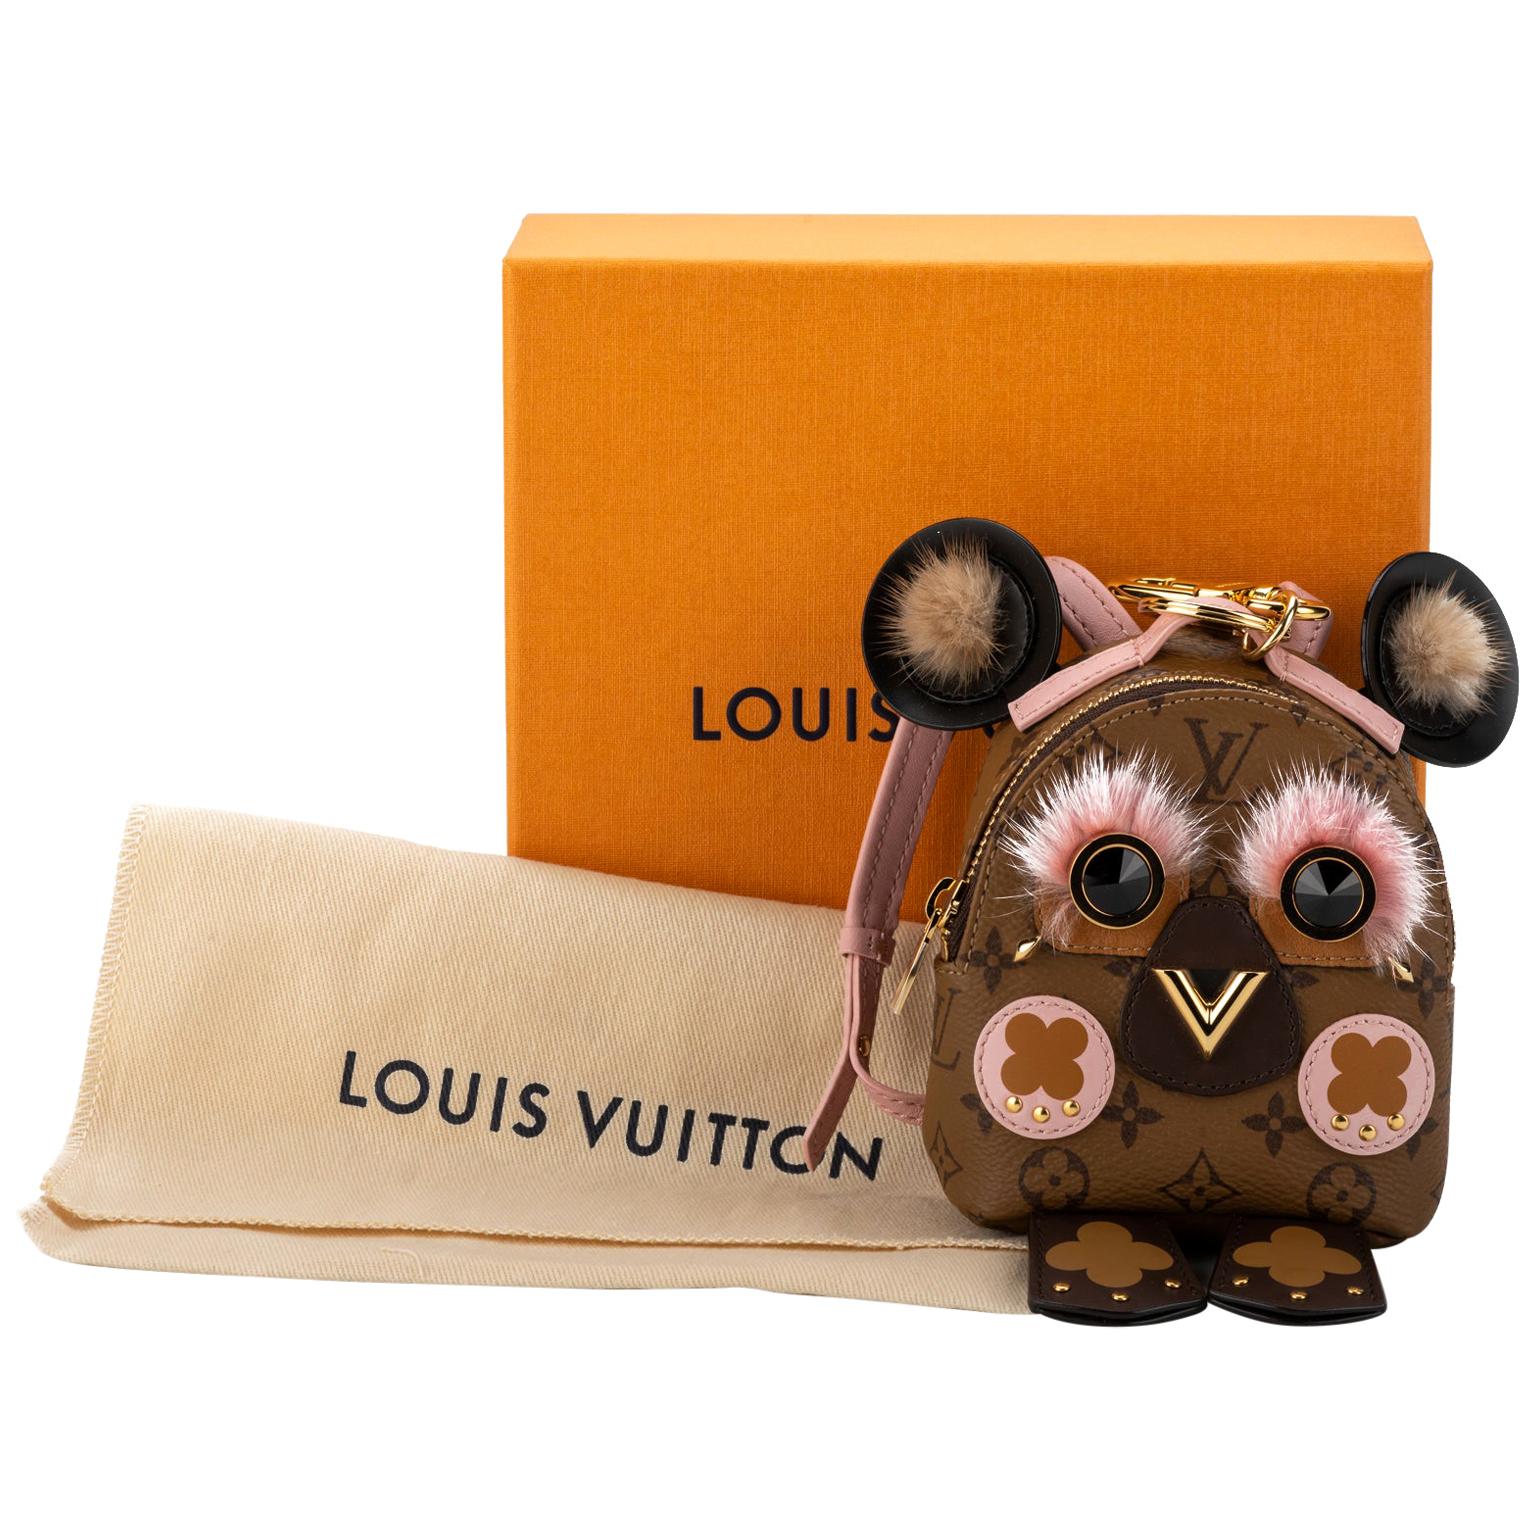 New in Box Rare Louis Vuitton Mini Owl Backpack Charm For Sale